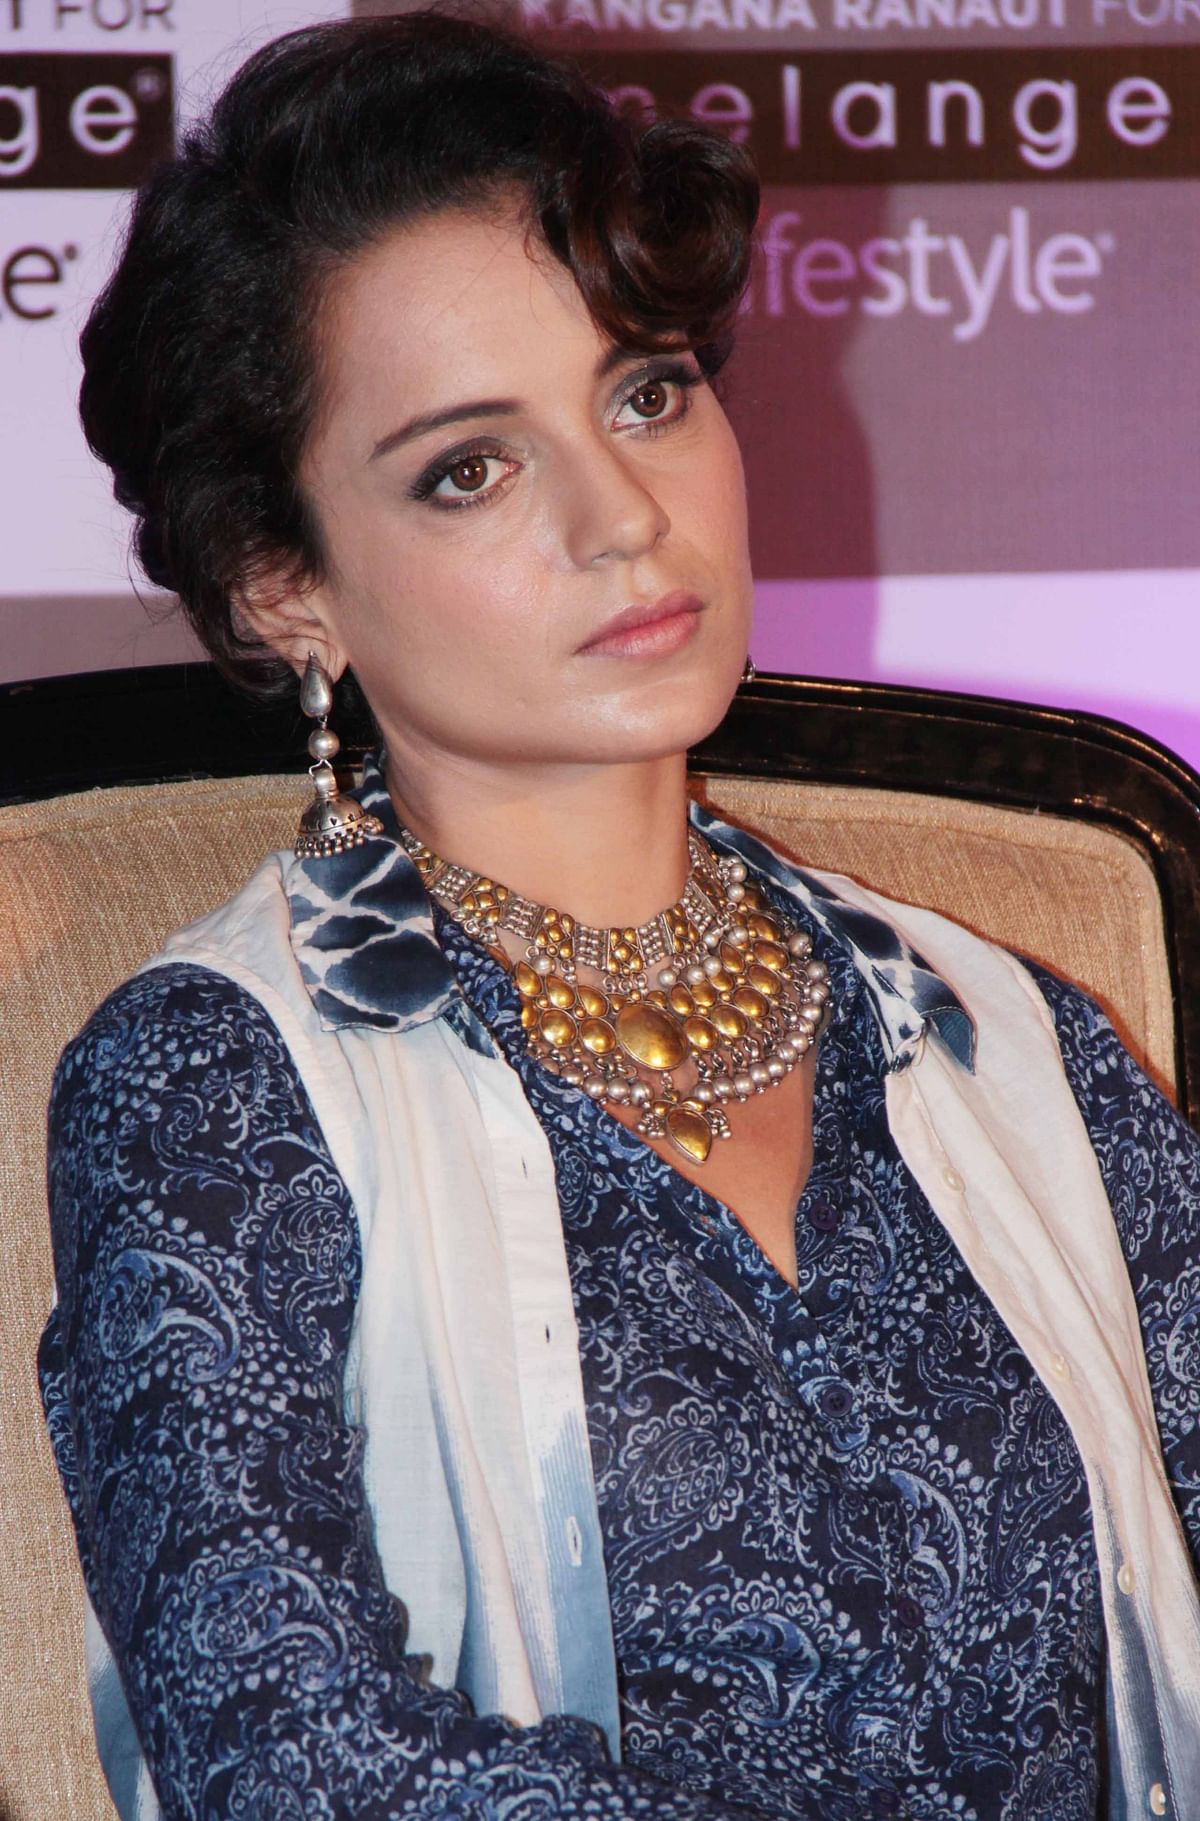 Kangana Ranaut dodges questions on her rumoured affair with Hrithik Roshan at a media event in Mumbai